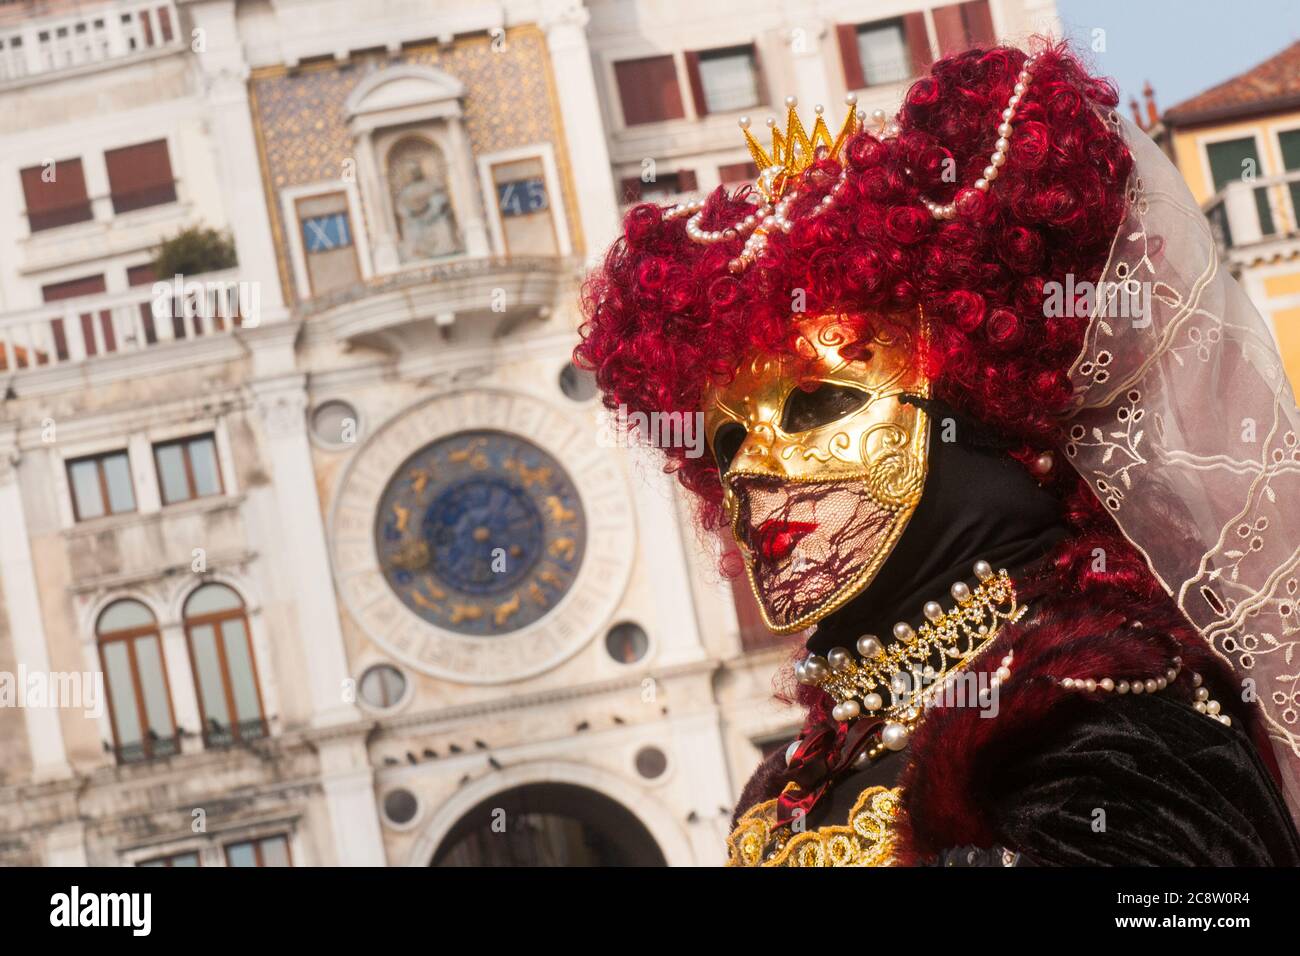 VENICE, ITALY - 28 FEBRUARY 2020: A beautiful mask in black and red costume poses during Venice Carnival Stock Photo